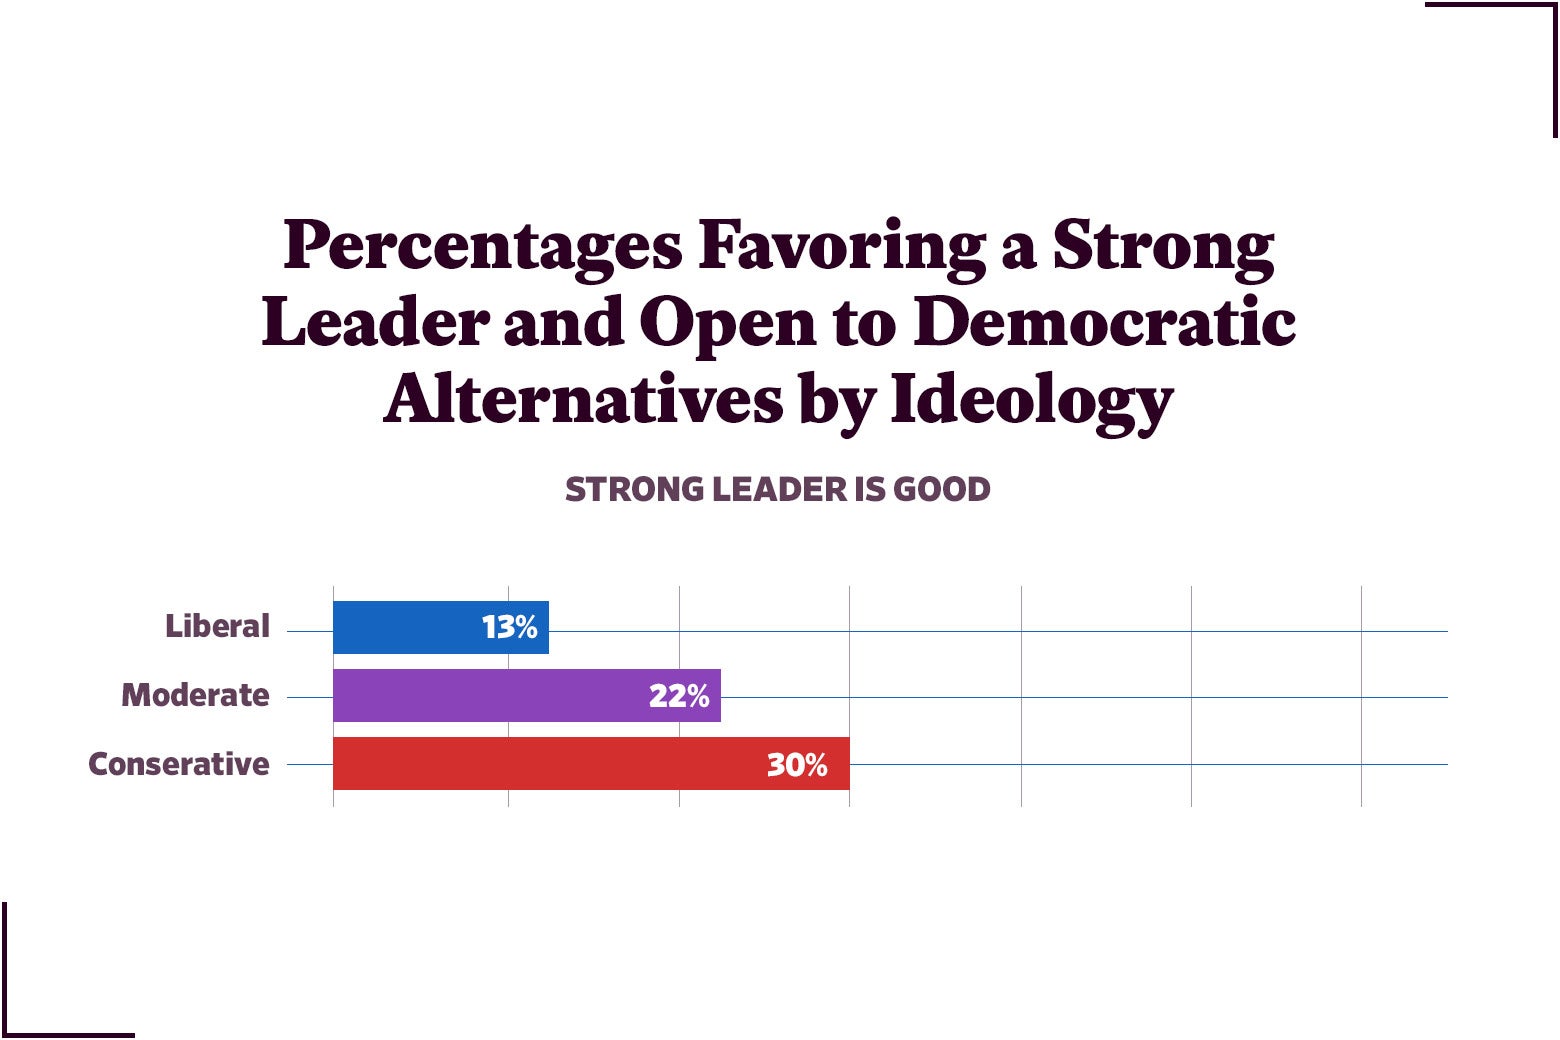 Figure 10: Percentages Favoring a Strong Leader and Open to Democratic Alternatives by Ideology